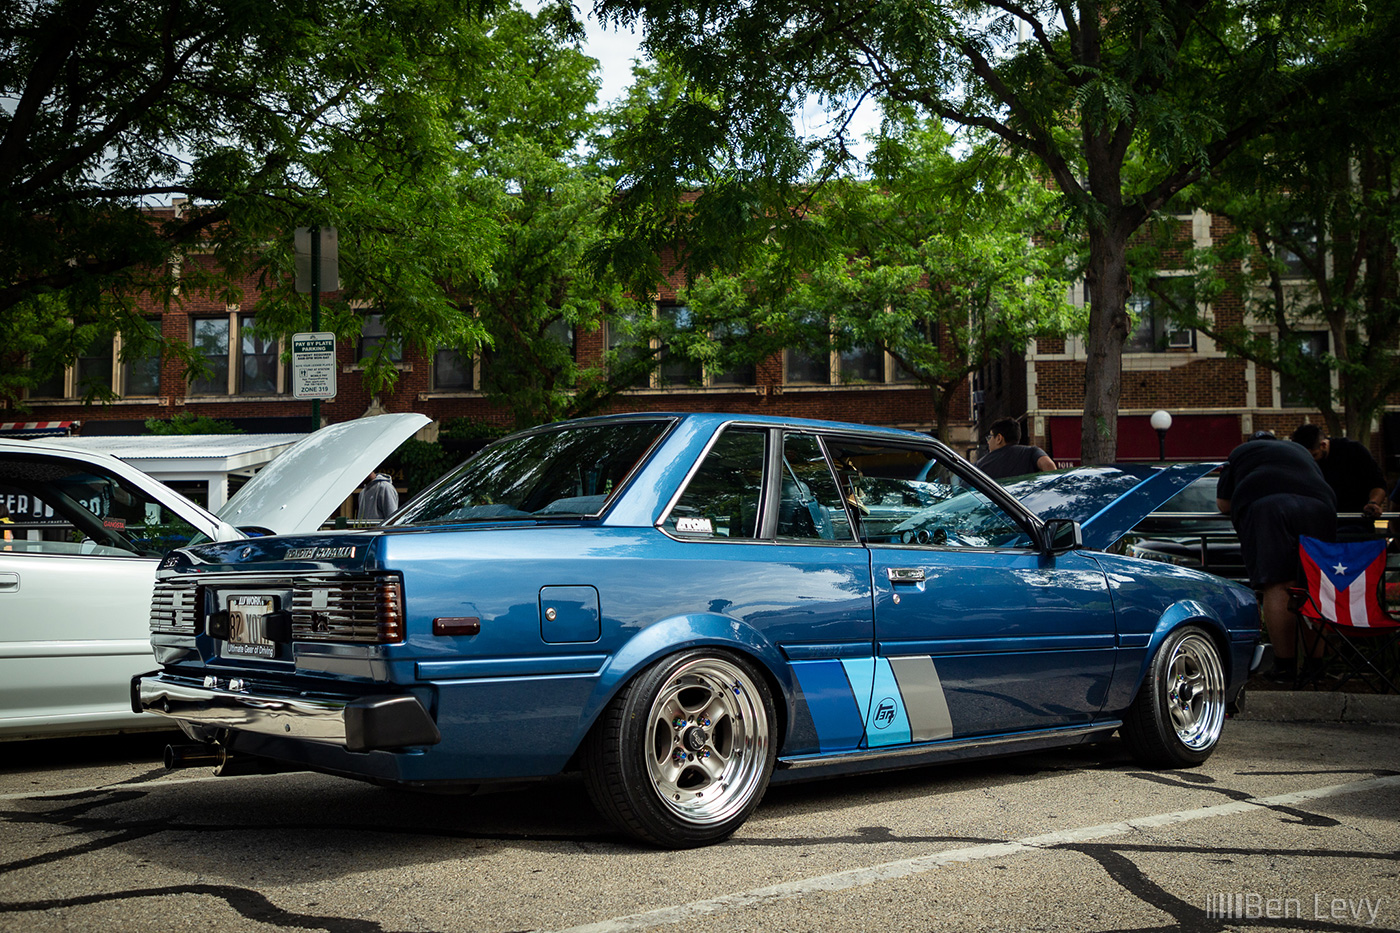 Blue Toyota Corolla Coupe at Cars & Coffee Oak Park